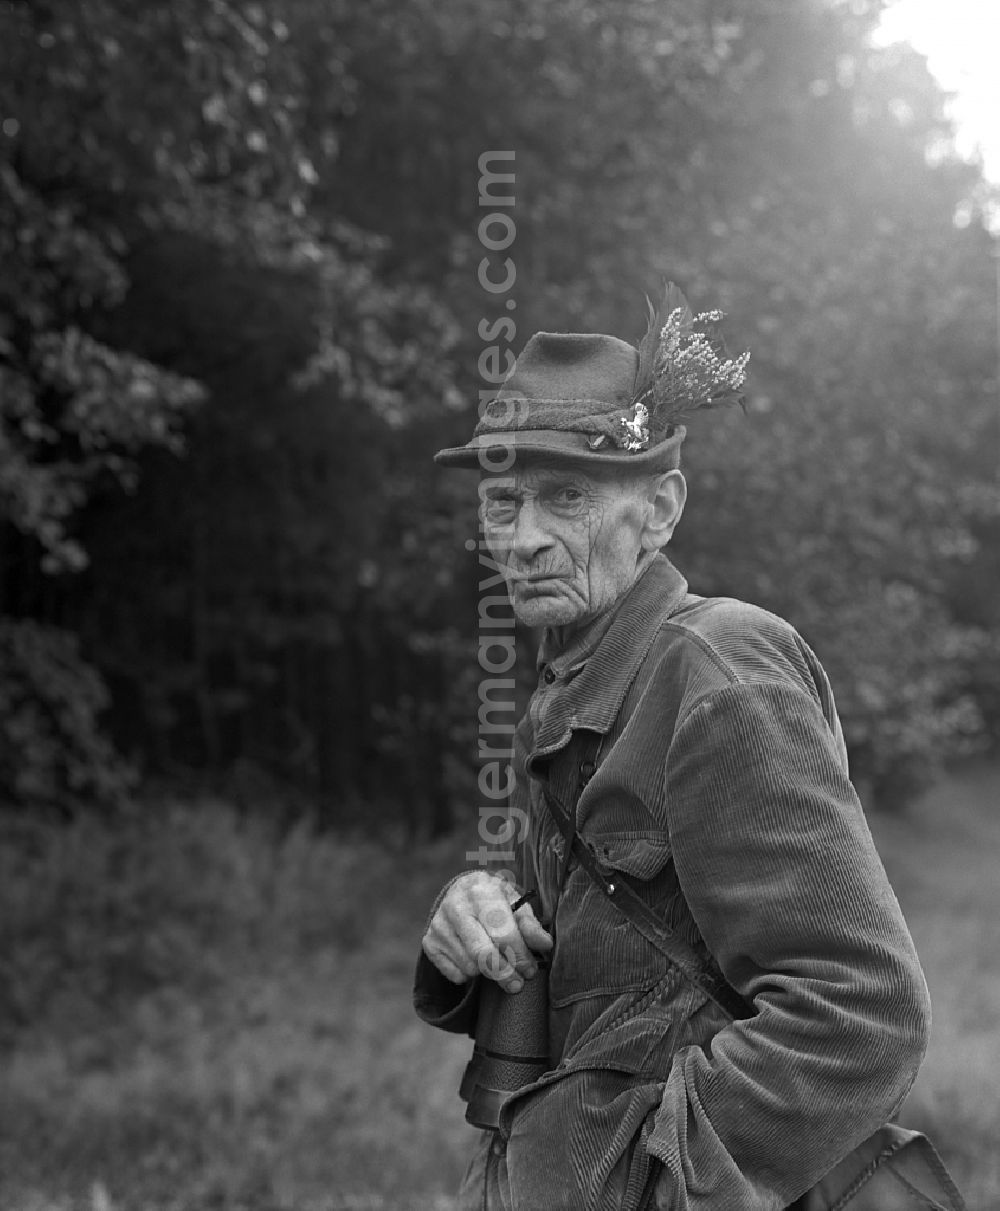 GDR picture archive: Weißkeißel - Portrait shot of a hunter and forester in Weisskeissel - Lausitz, Saxony on the territory of the former GDR, German Democratic Republic